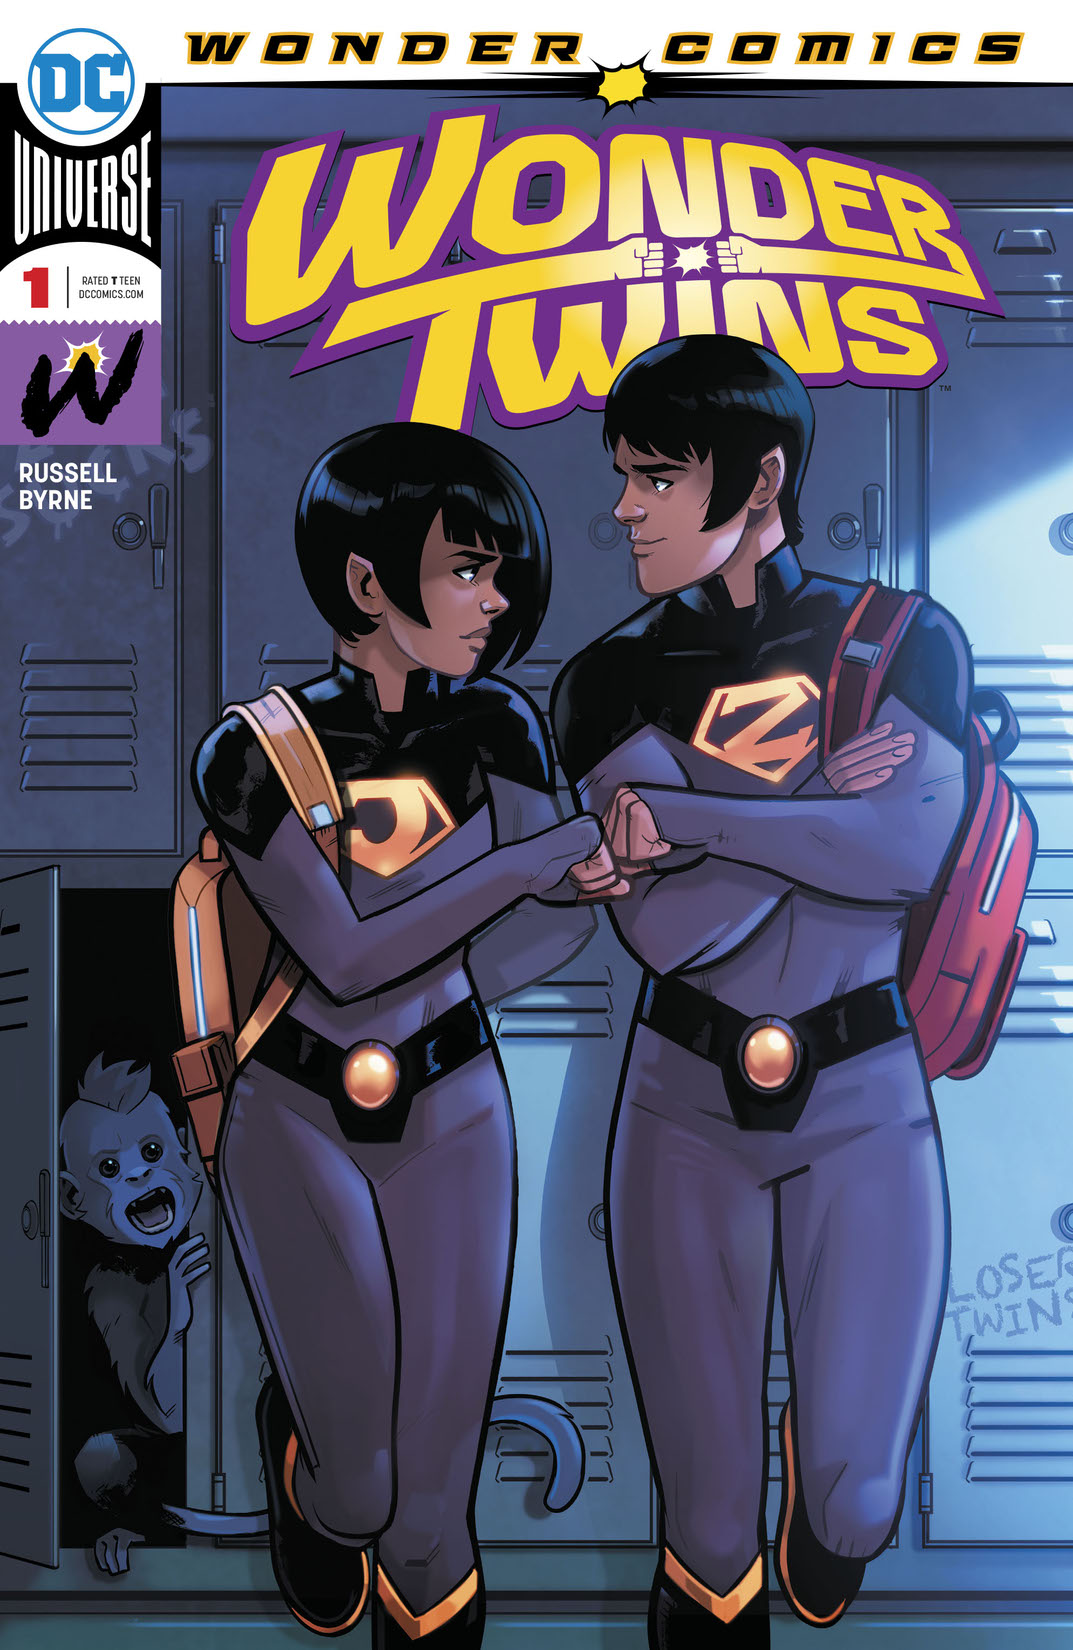 Wonder Twins #1 preview images